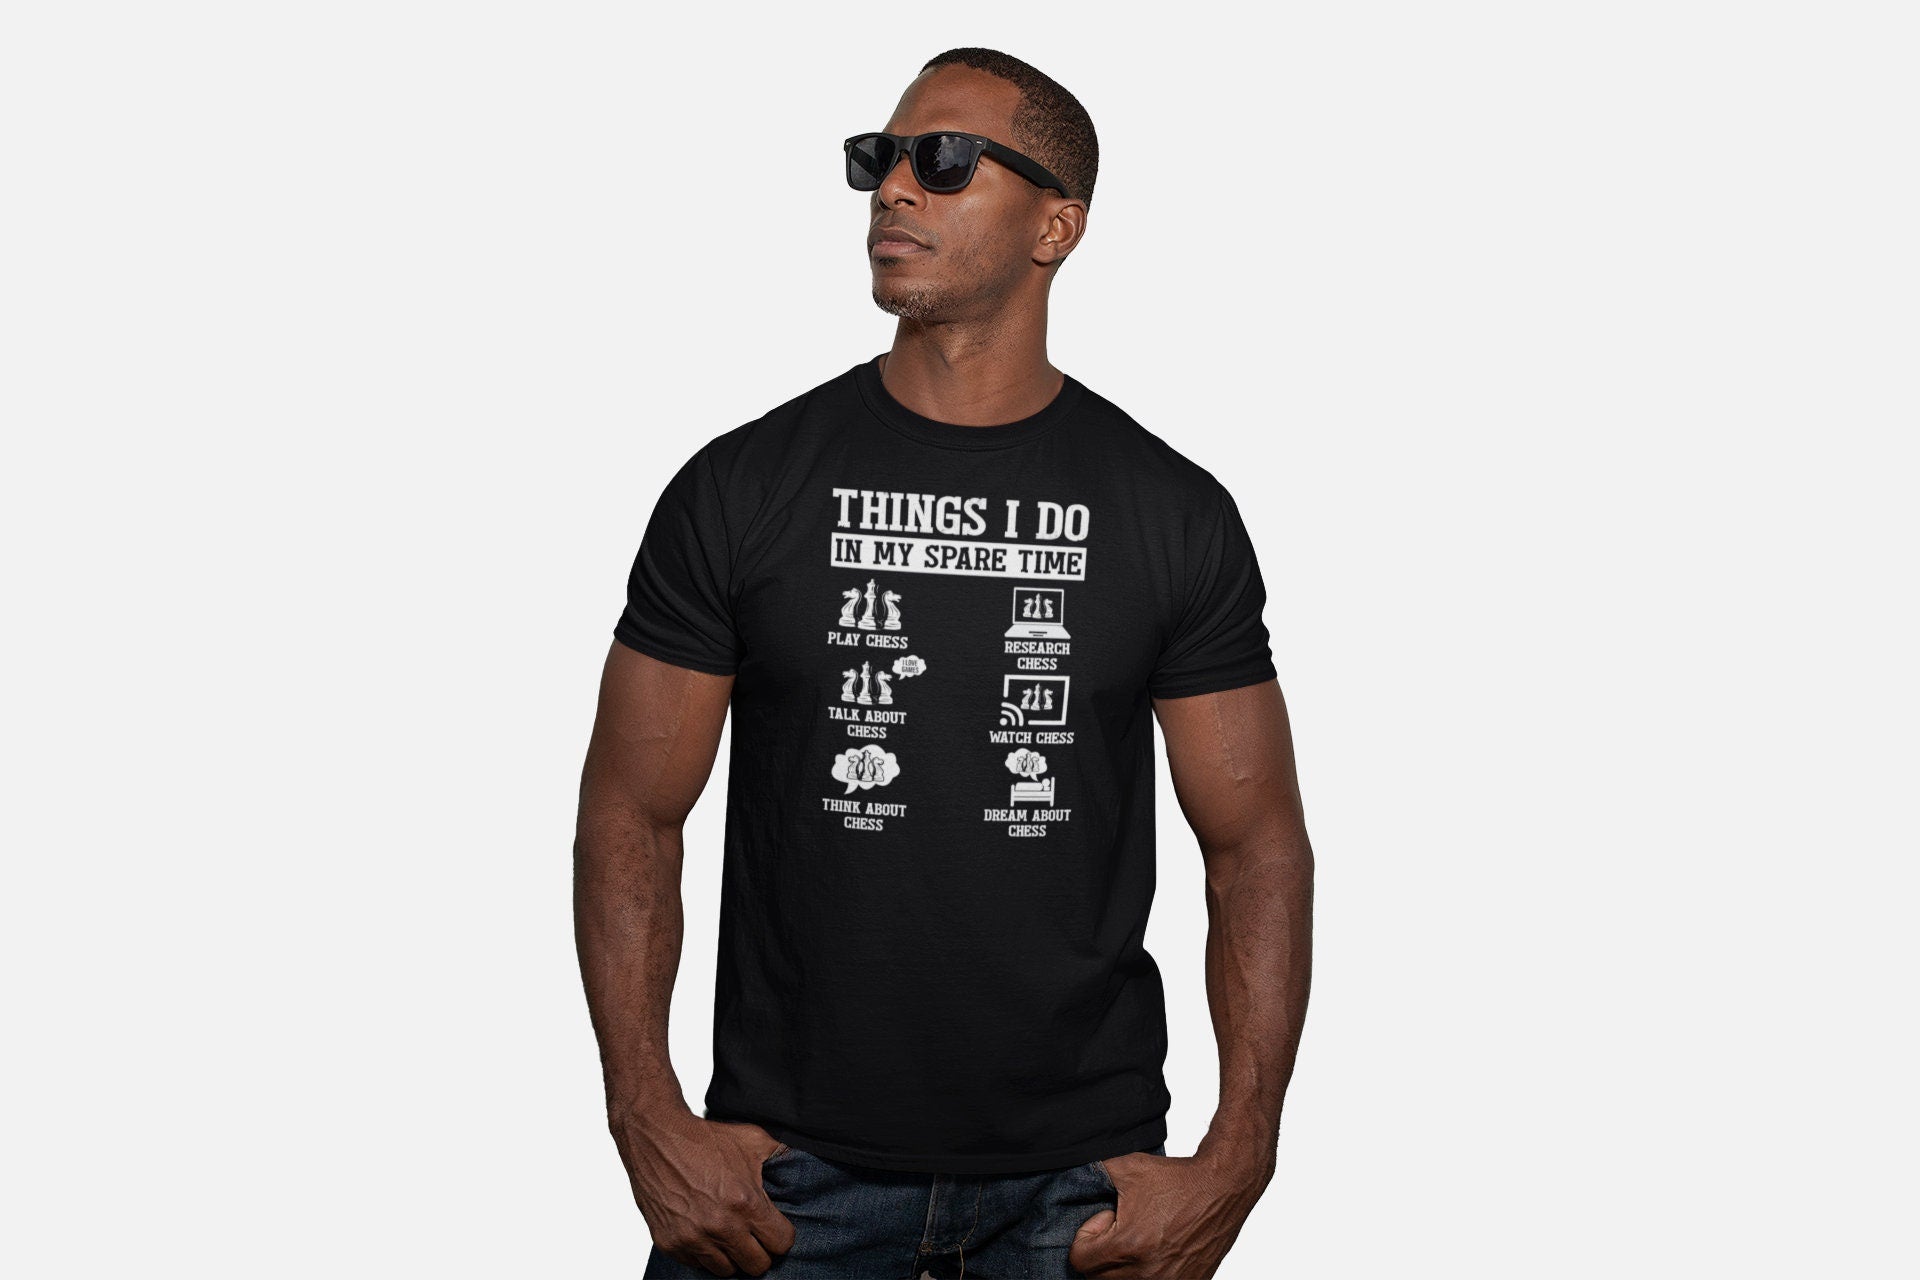 Things I Do In My Spare Time Chess Shirt, Chess Player Gift, Chess Tournament Shirt